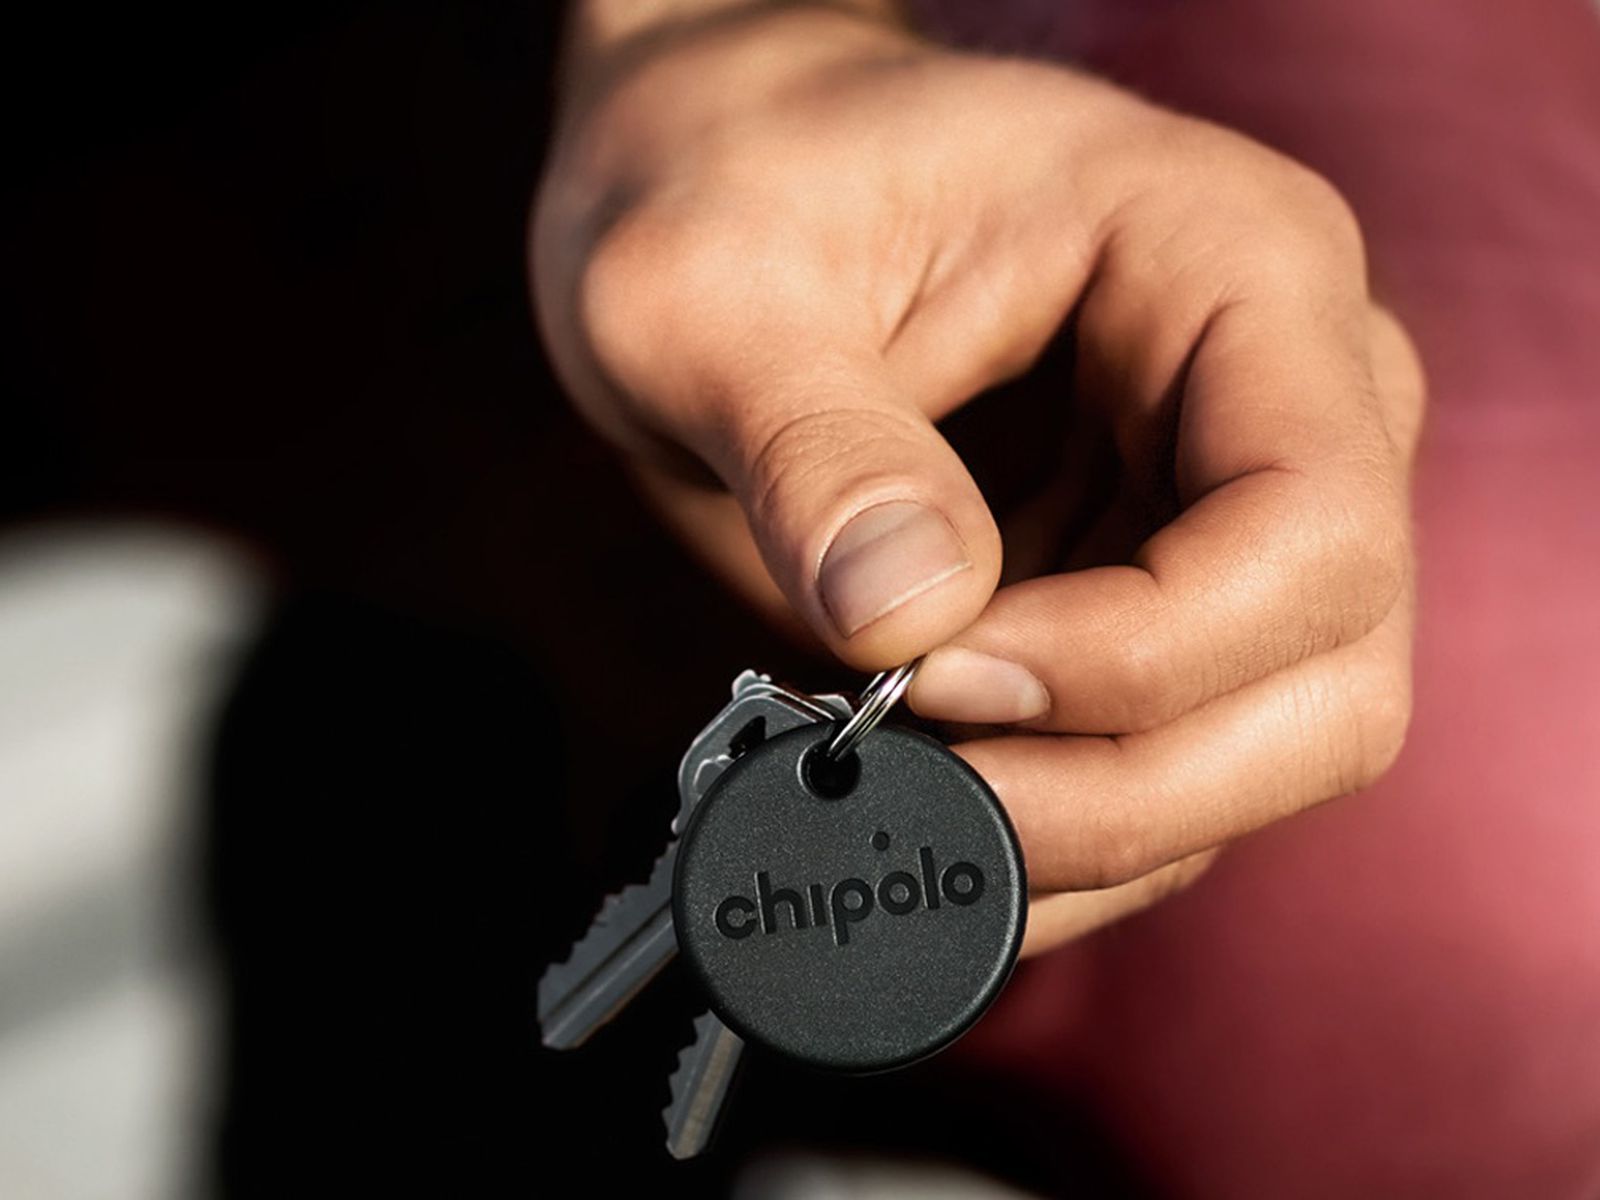 Chipolo Announces New 'ONE Spot' Item Tracker With Find My